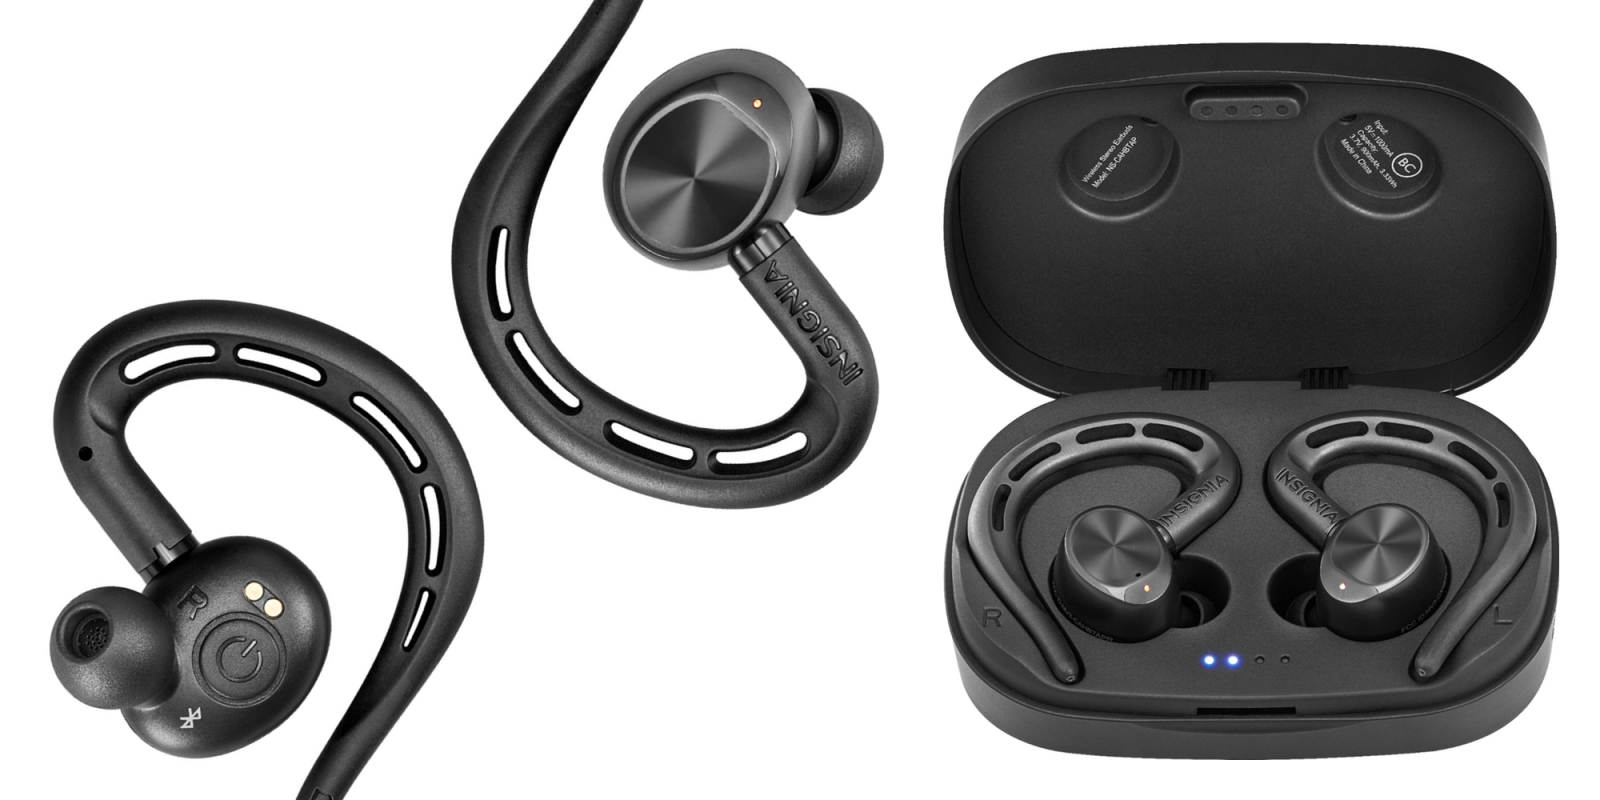 Insignia True Wireless Bluetooth Earbuds get first price drop to 100